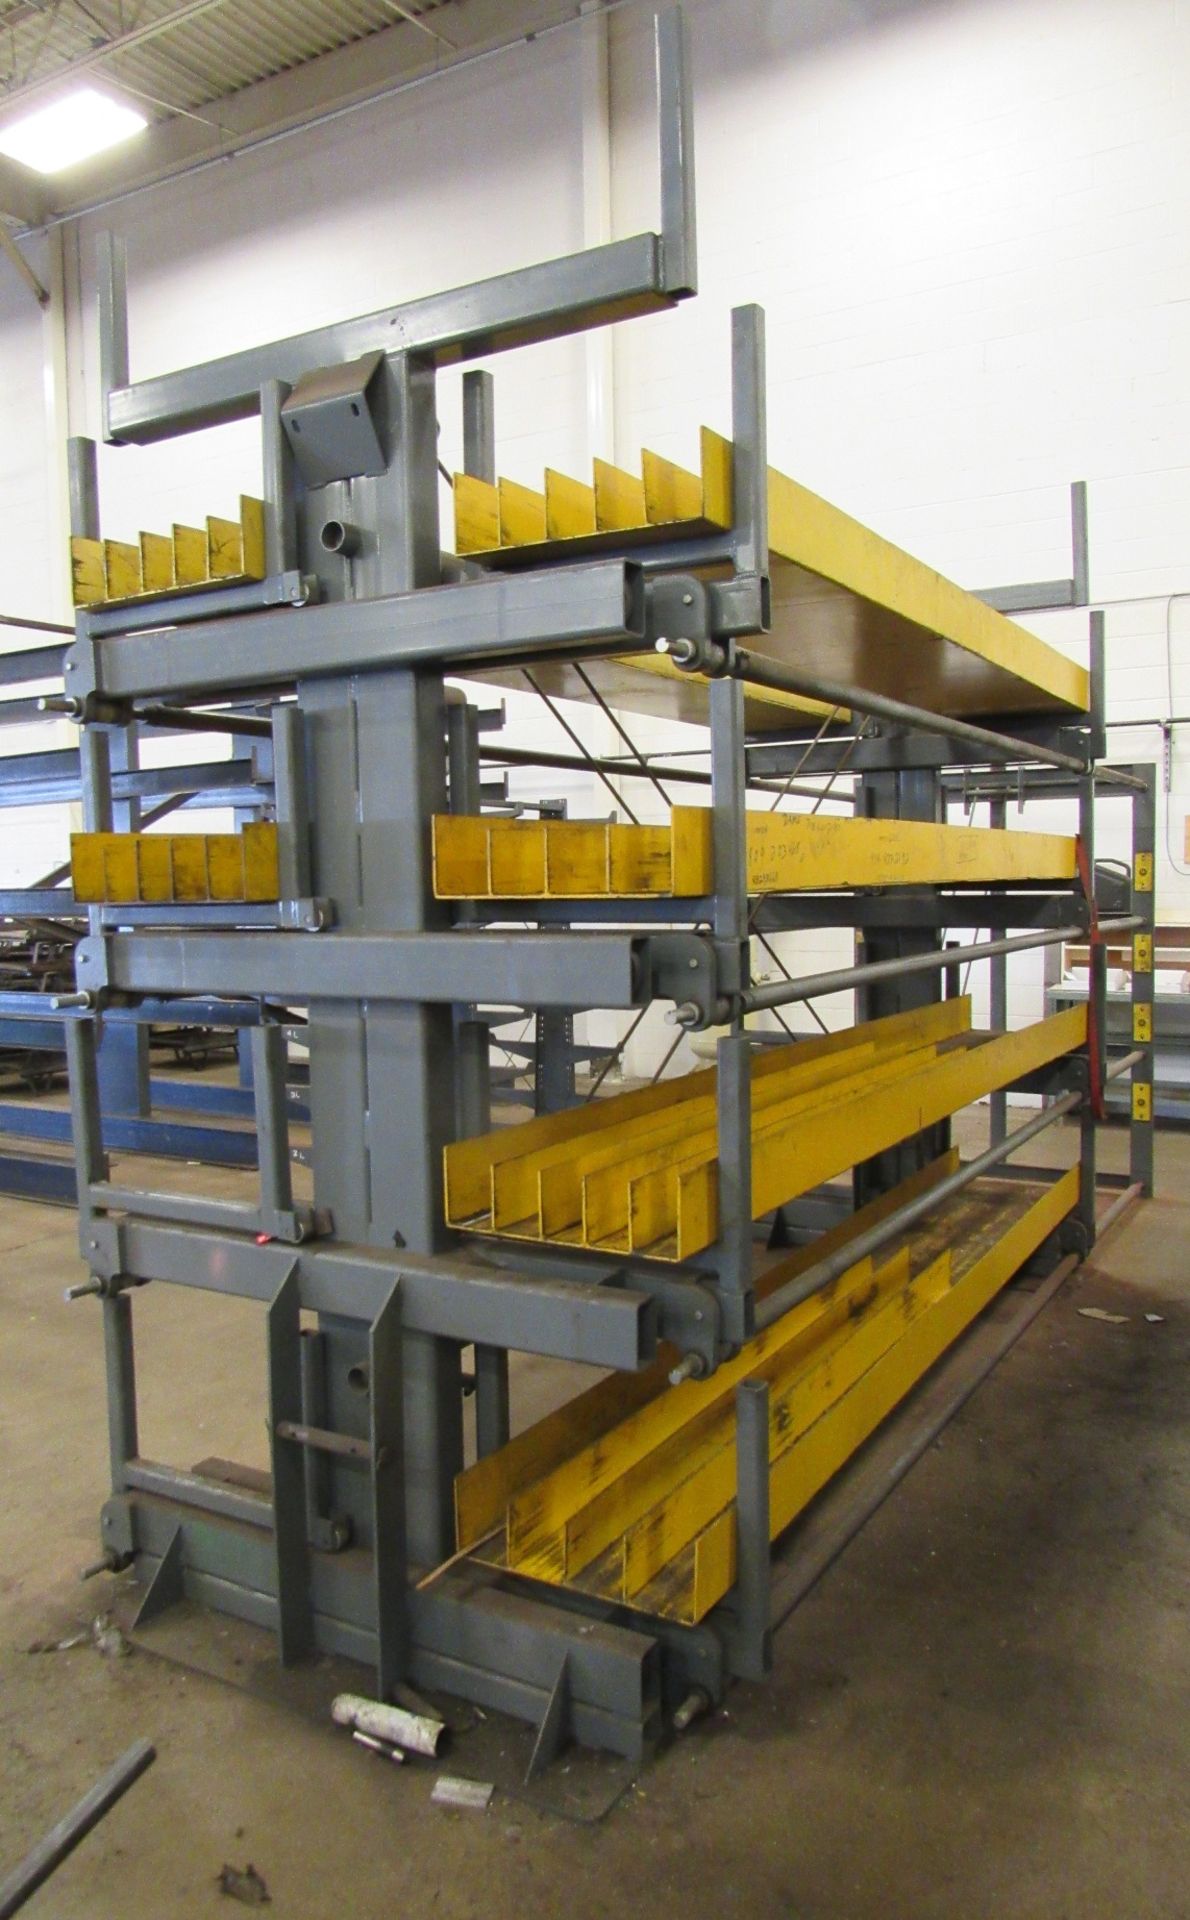 Steel Storage Sytems Mod. 4T-2G-20 x 15R-2 Articulating Material Storage Rack - Image 2 of 5